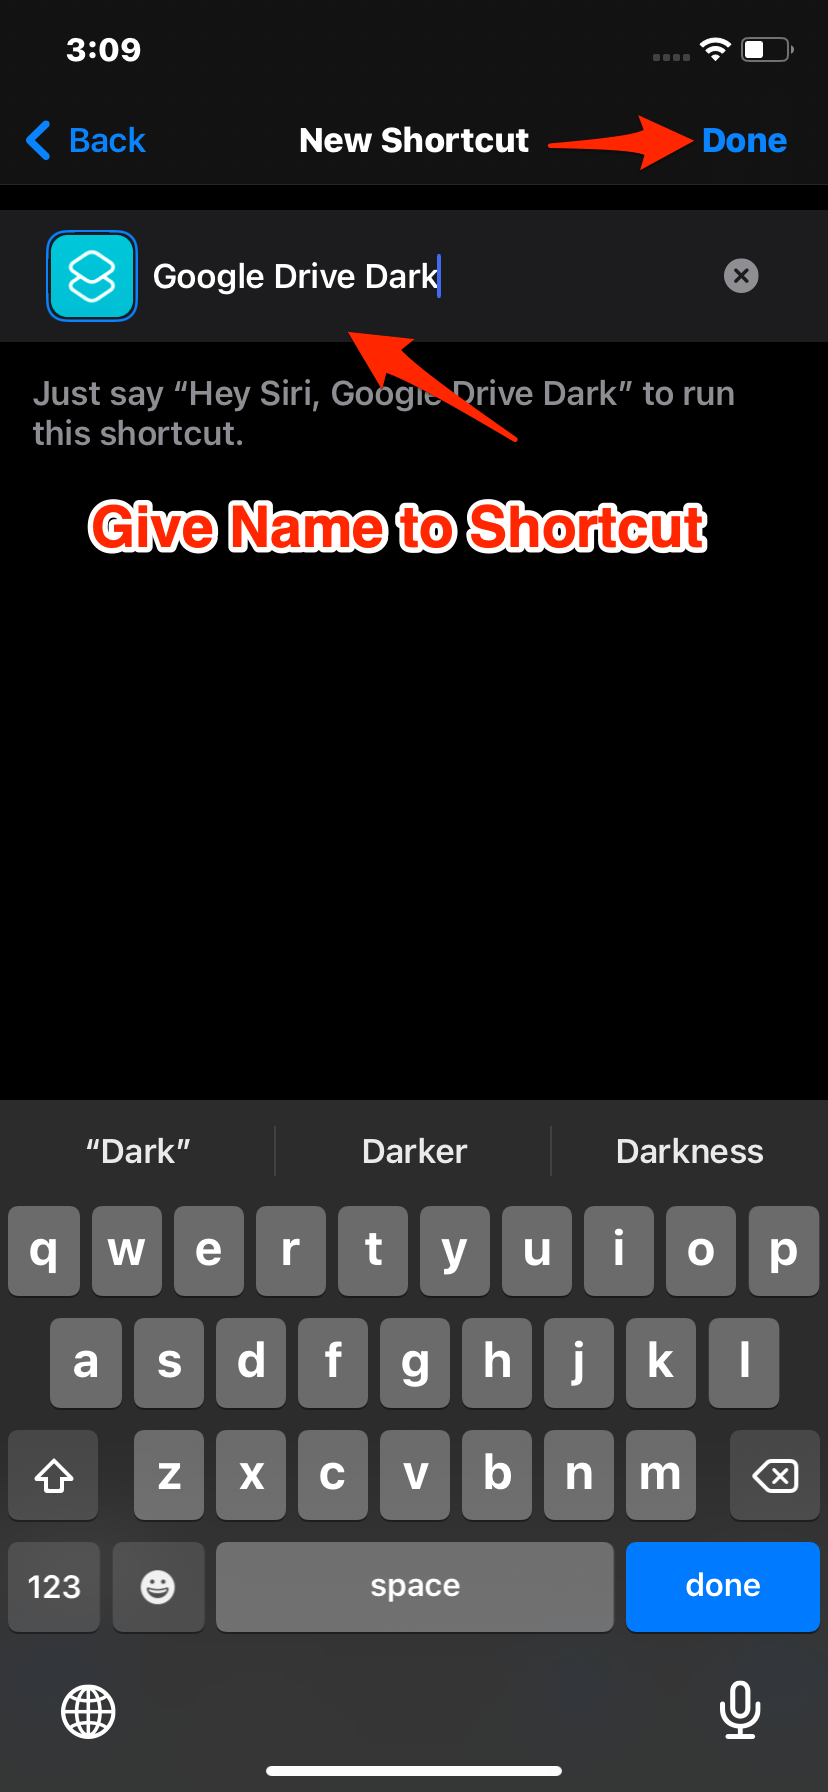 Add_Shortcut_a_Name_and_Click_Done